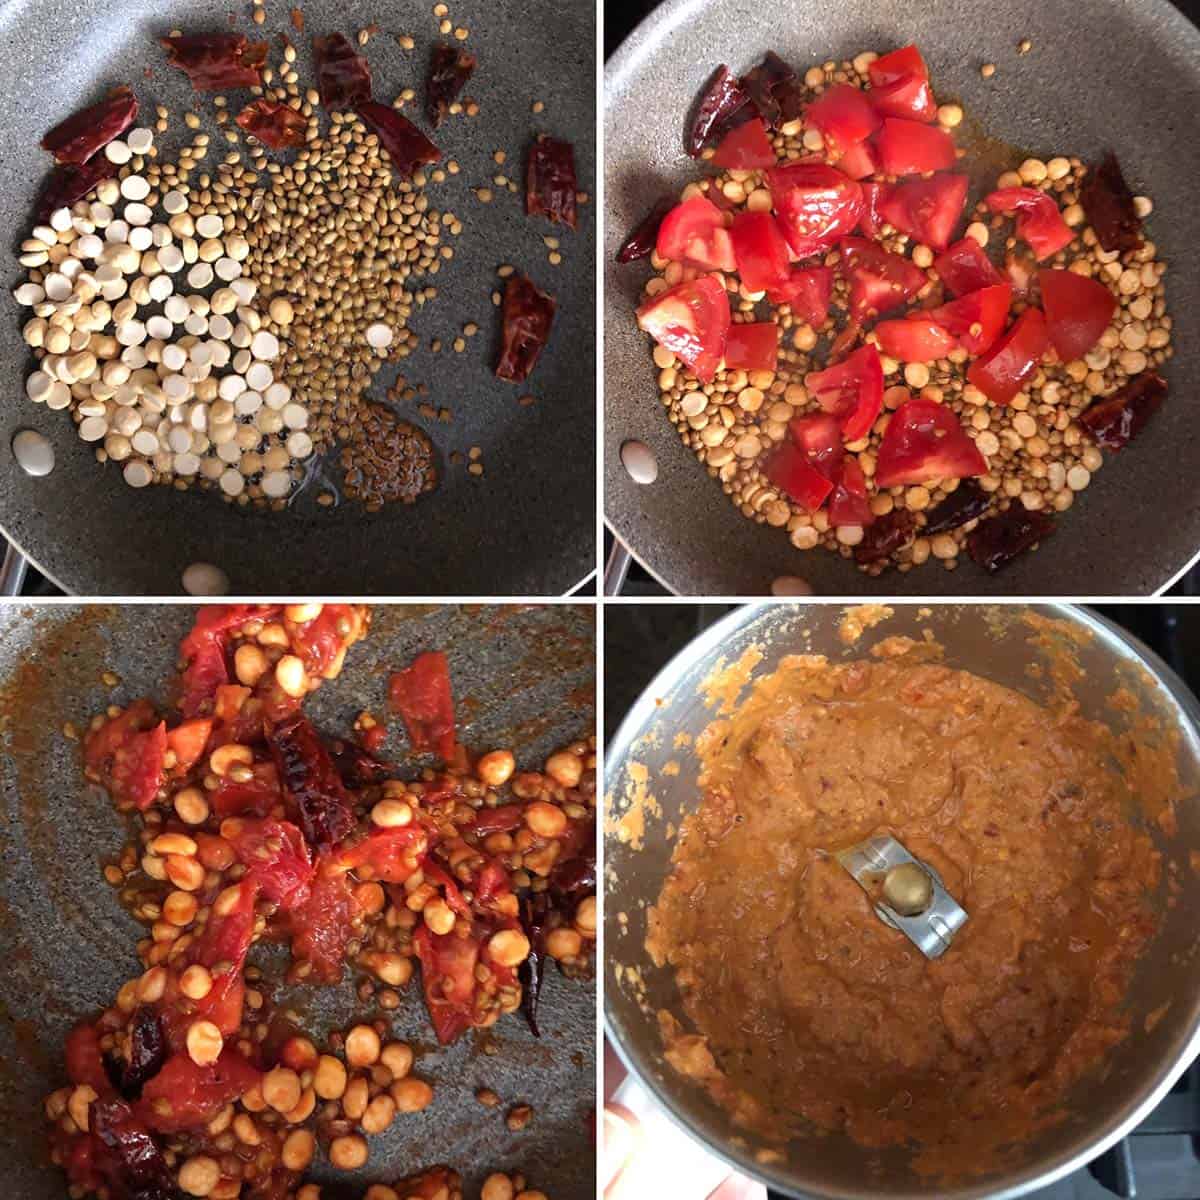 4 panel photo showing the making spice paste.